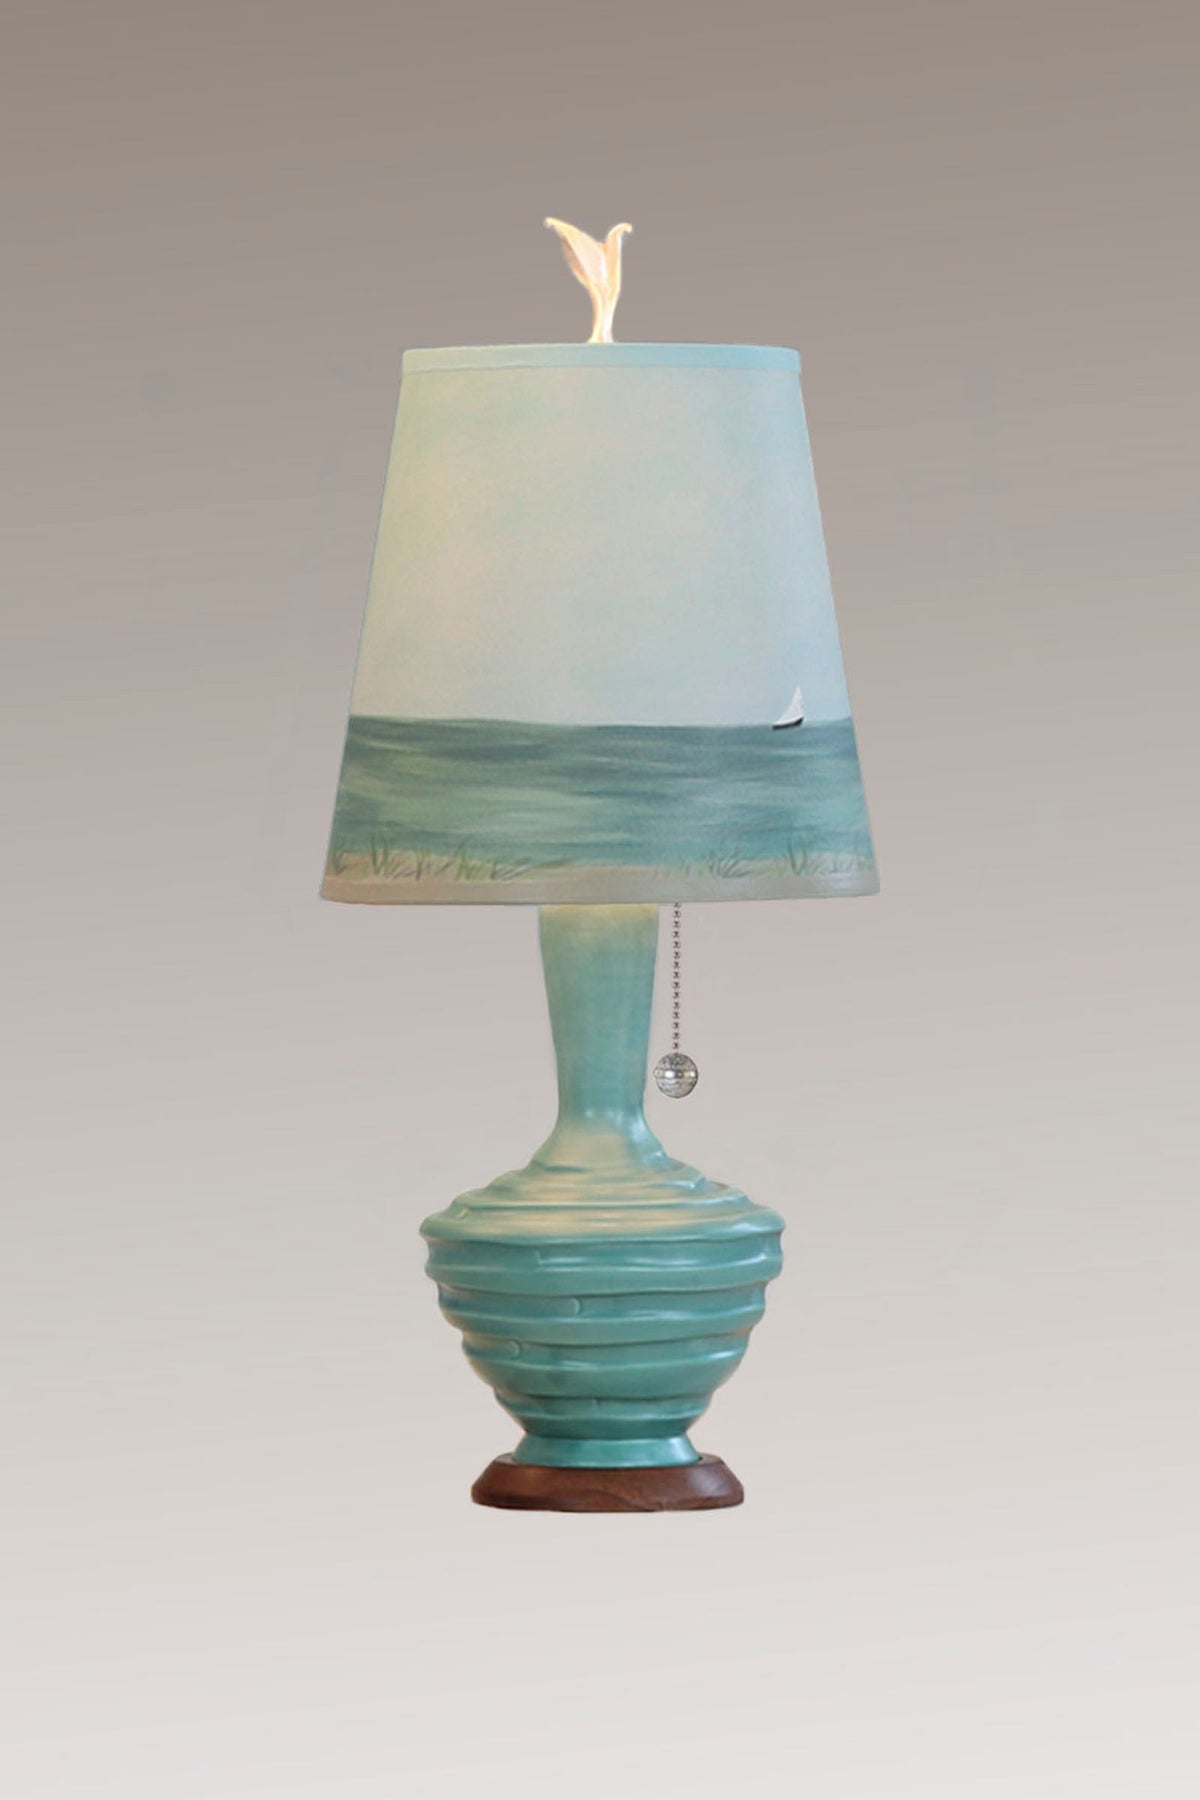 Ceramic Table Lamp with Small Drum Shade in Shore